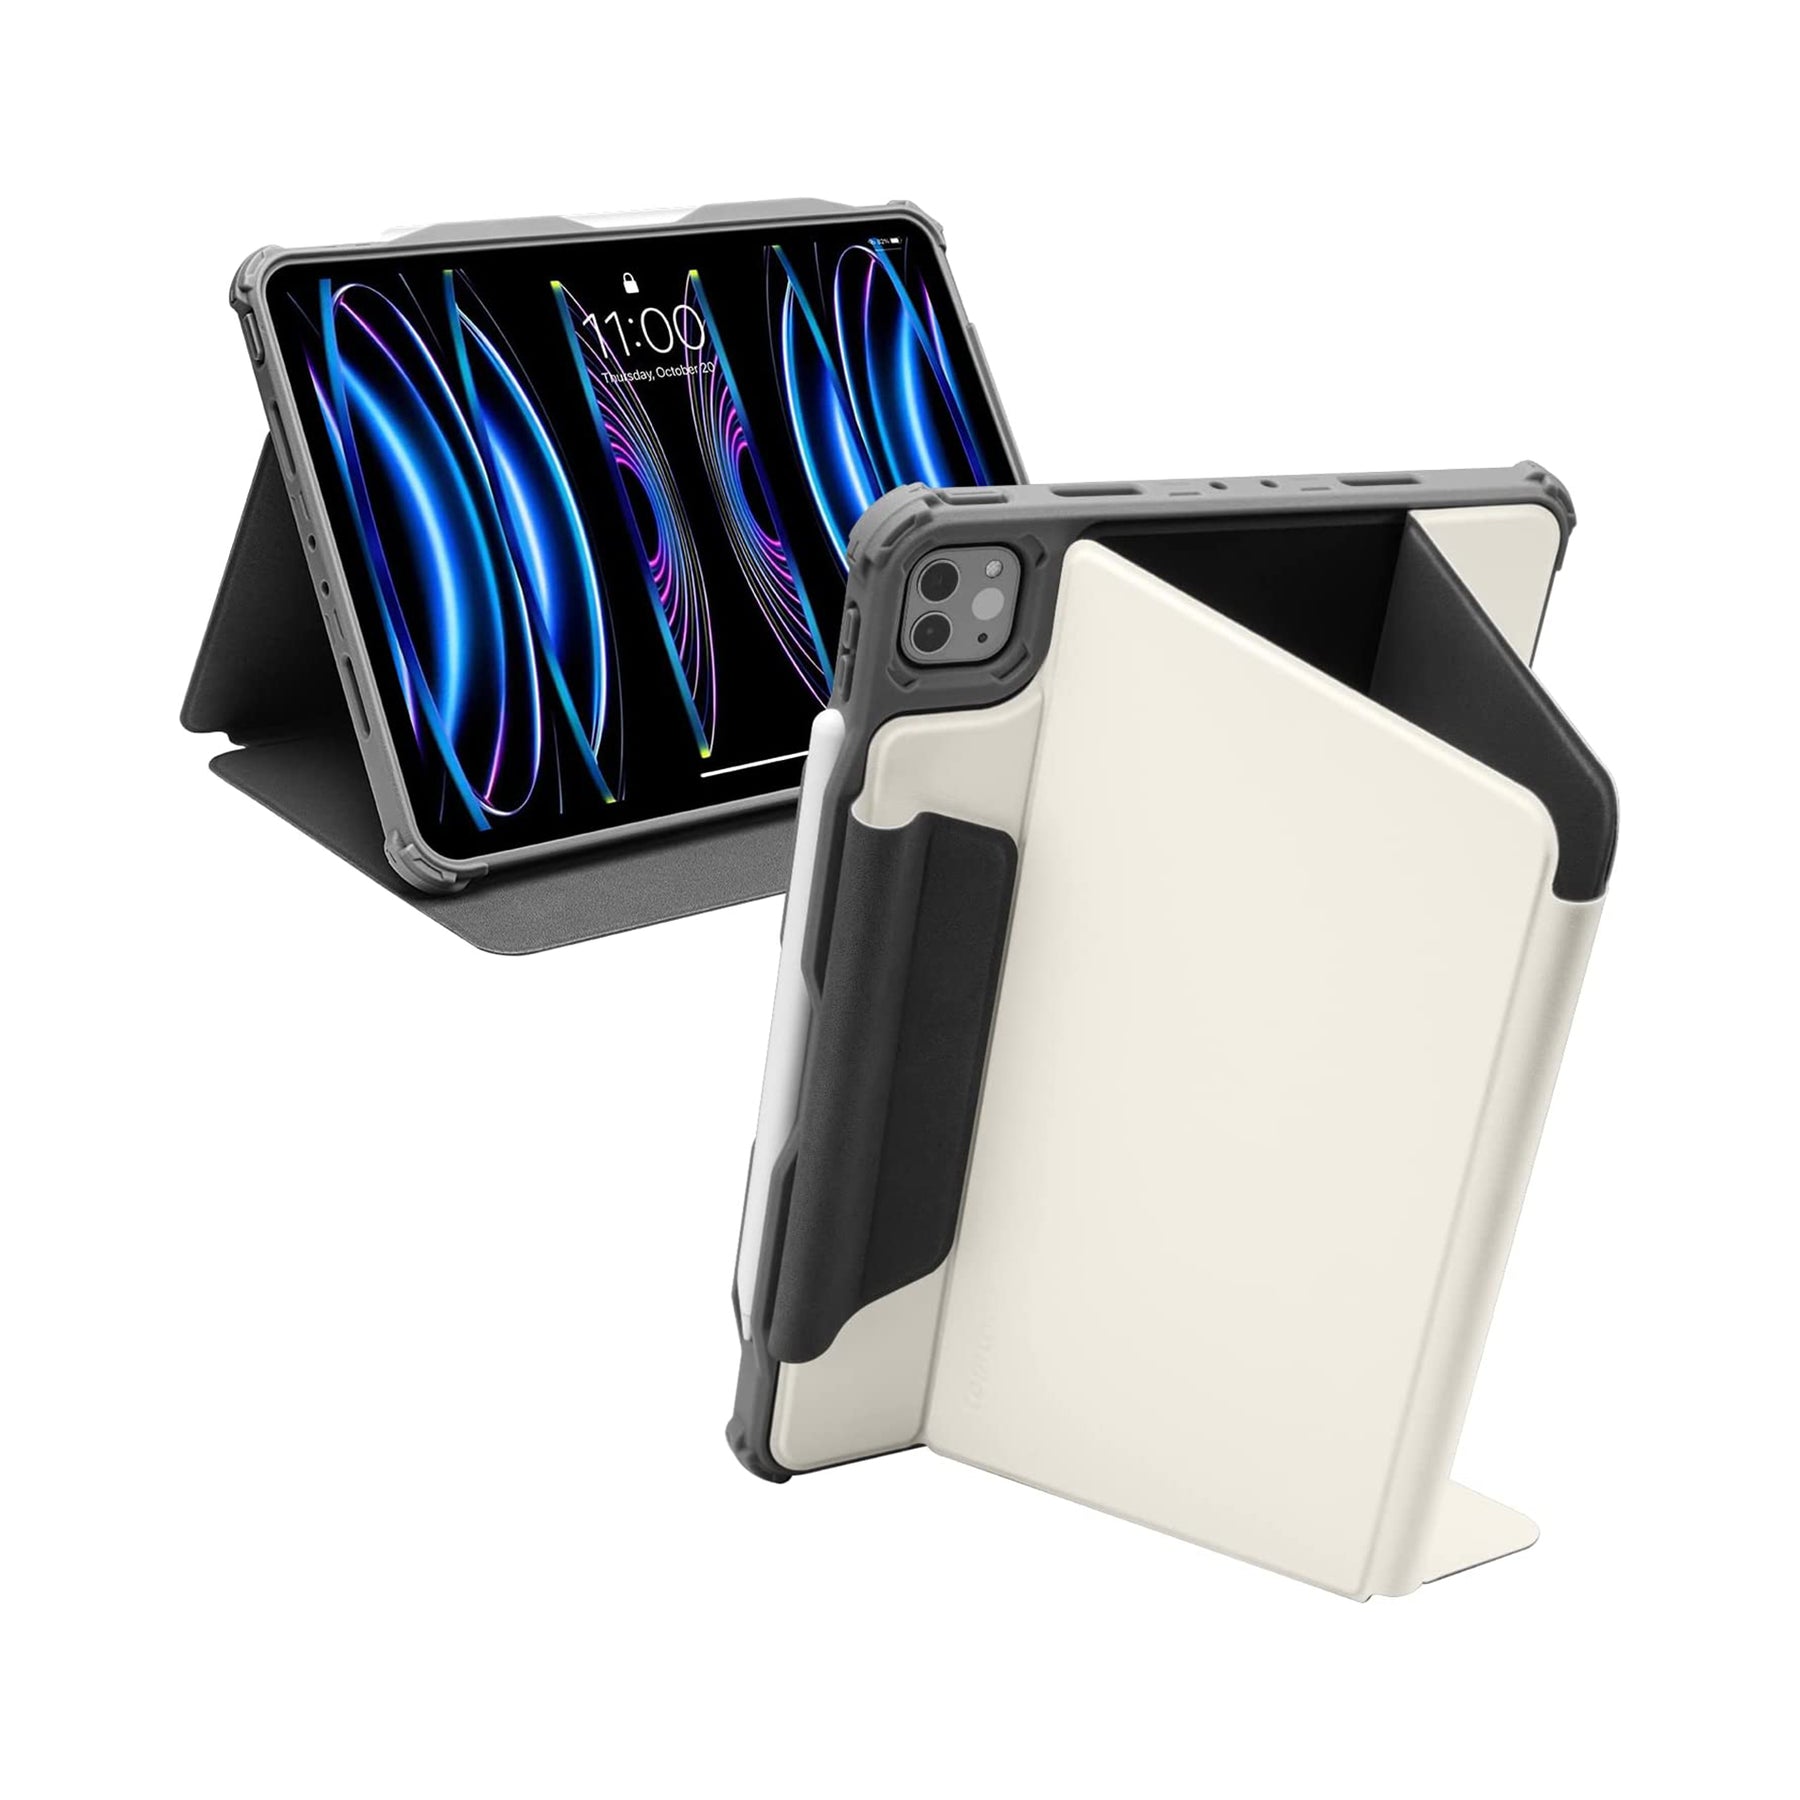 Tomtoc iPad Pro 11 Inch Case, Detachable Ultra Case with 4 Airbag  Protectors, Strength and Resilience, Premium PU Leather, Magnetic Strap  Support, 360